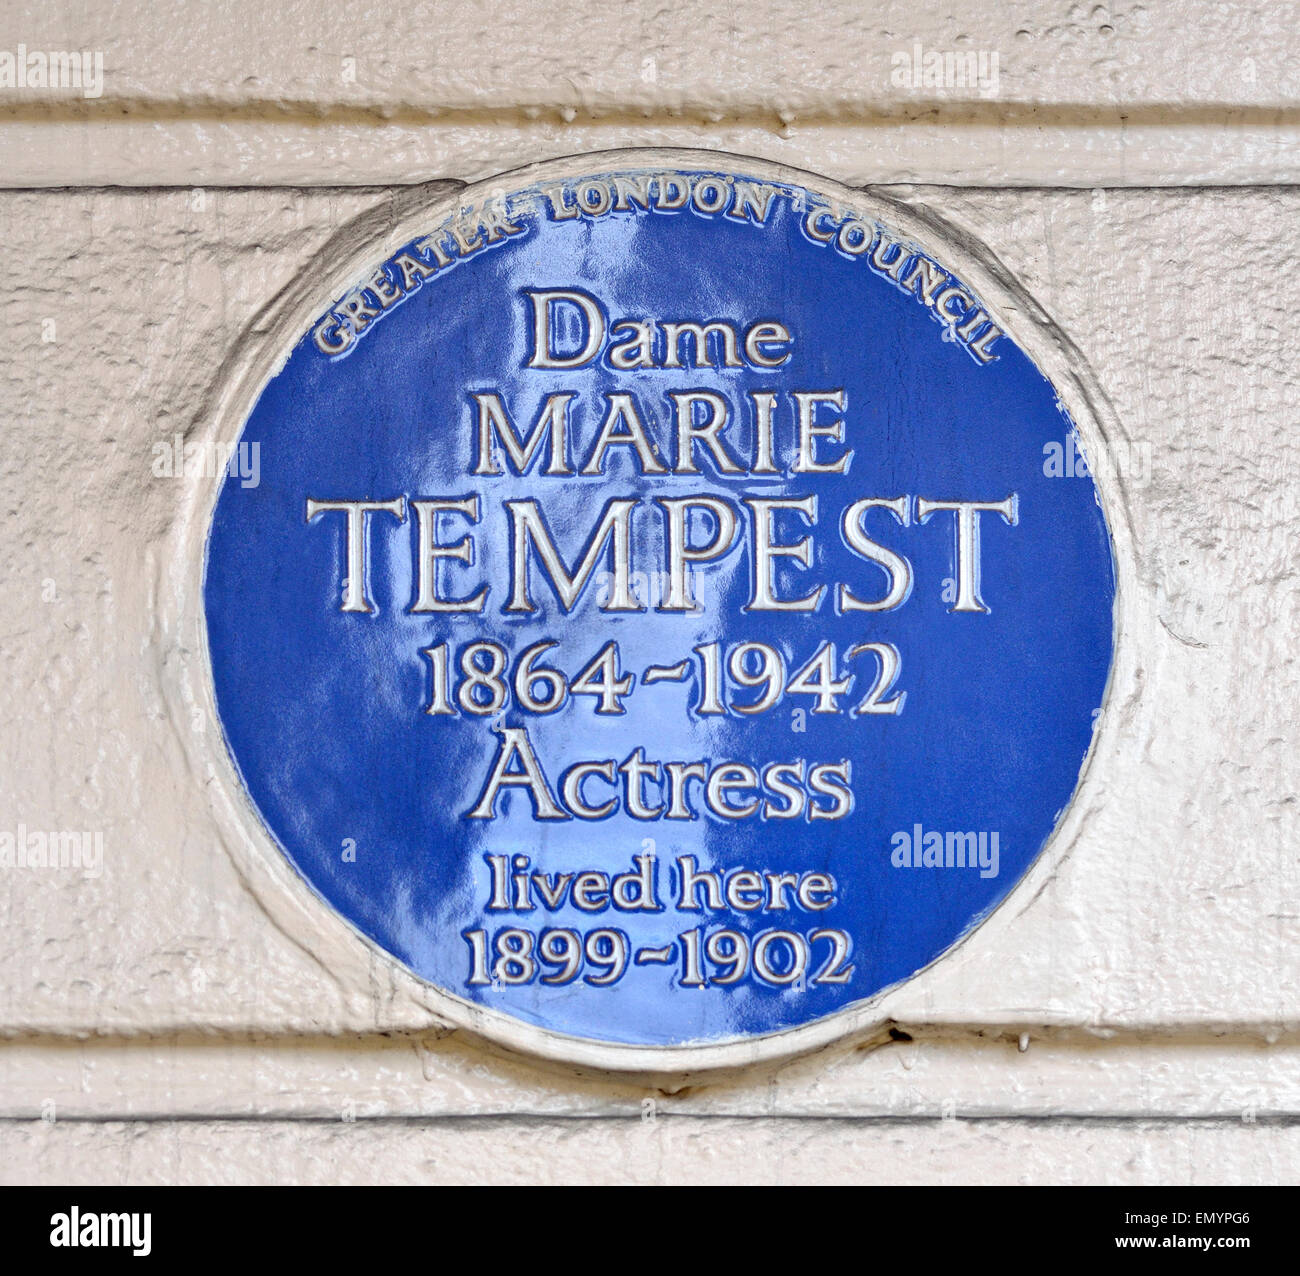 London, England, UK. Commemorative Blue Plaque: "Dame Marie Tempest 1864-1942 actress lived here 1899-1902" Stock Photo